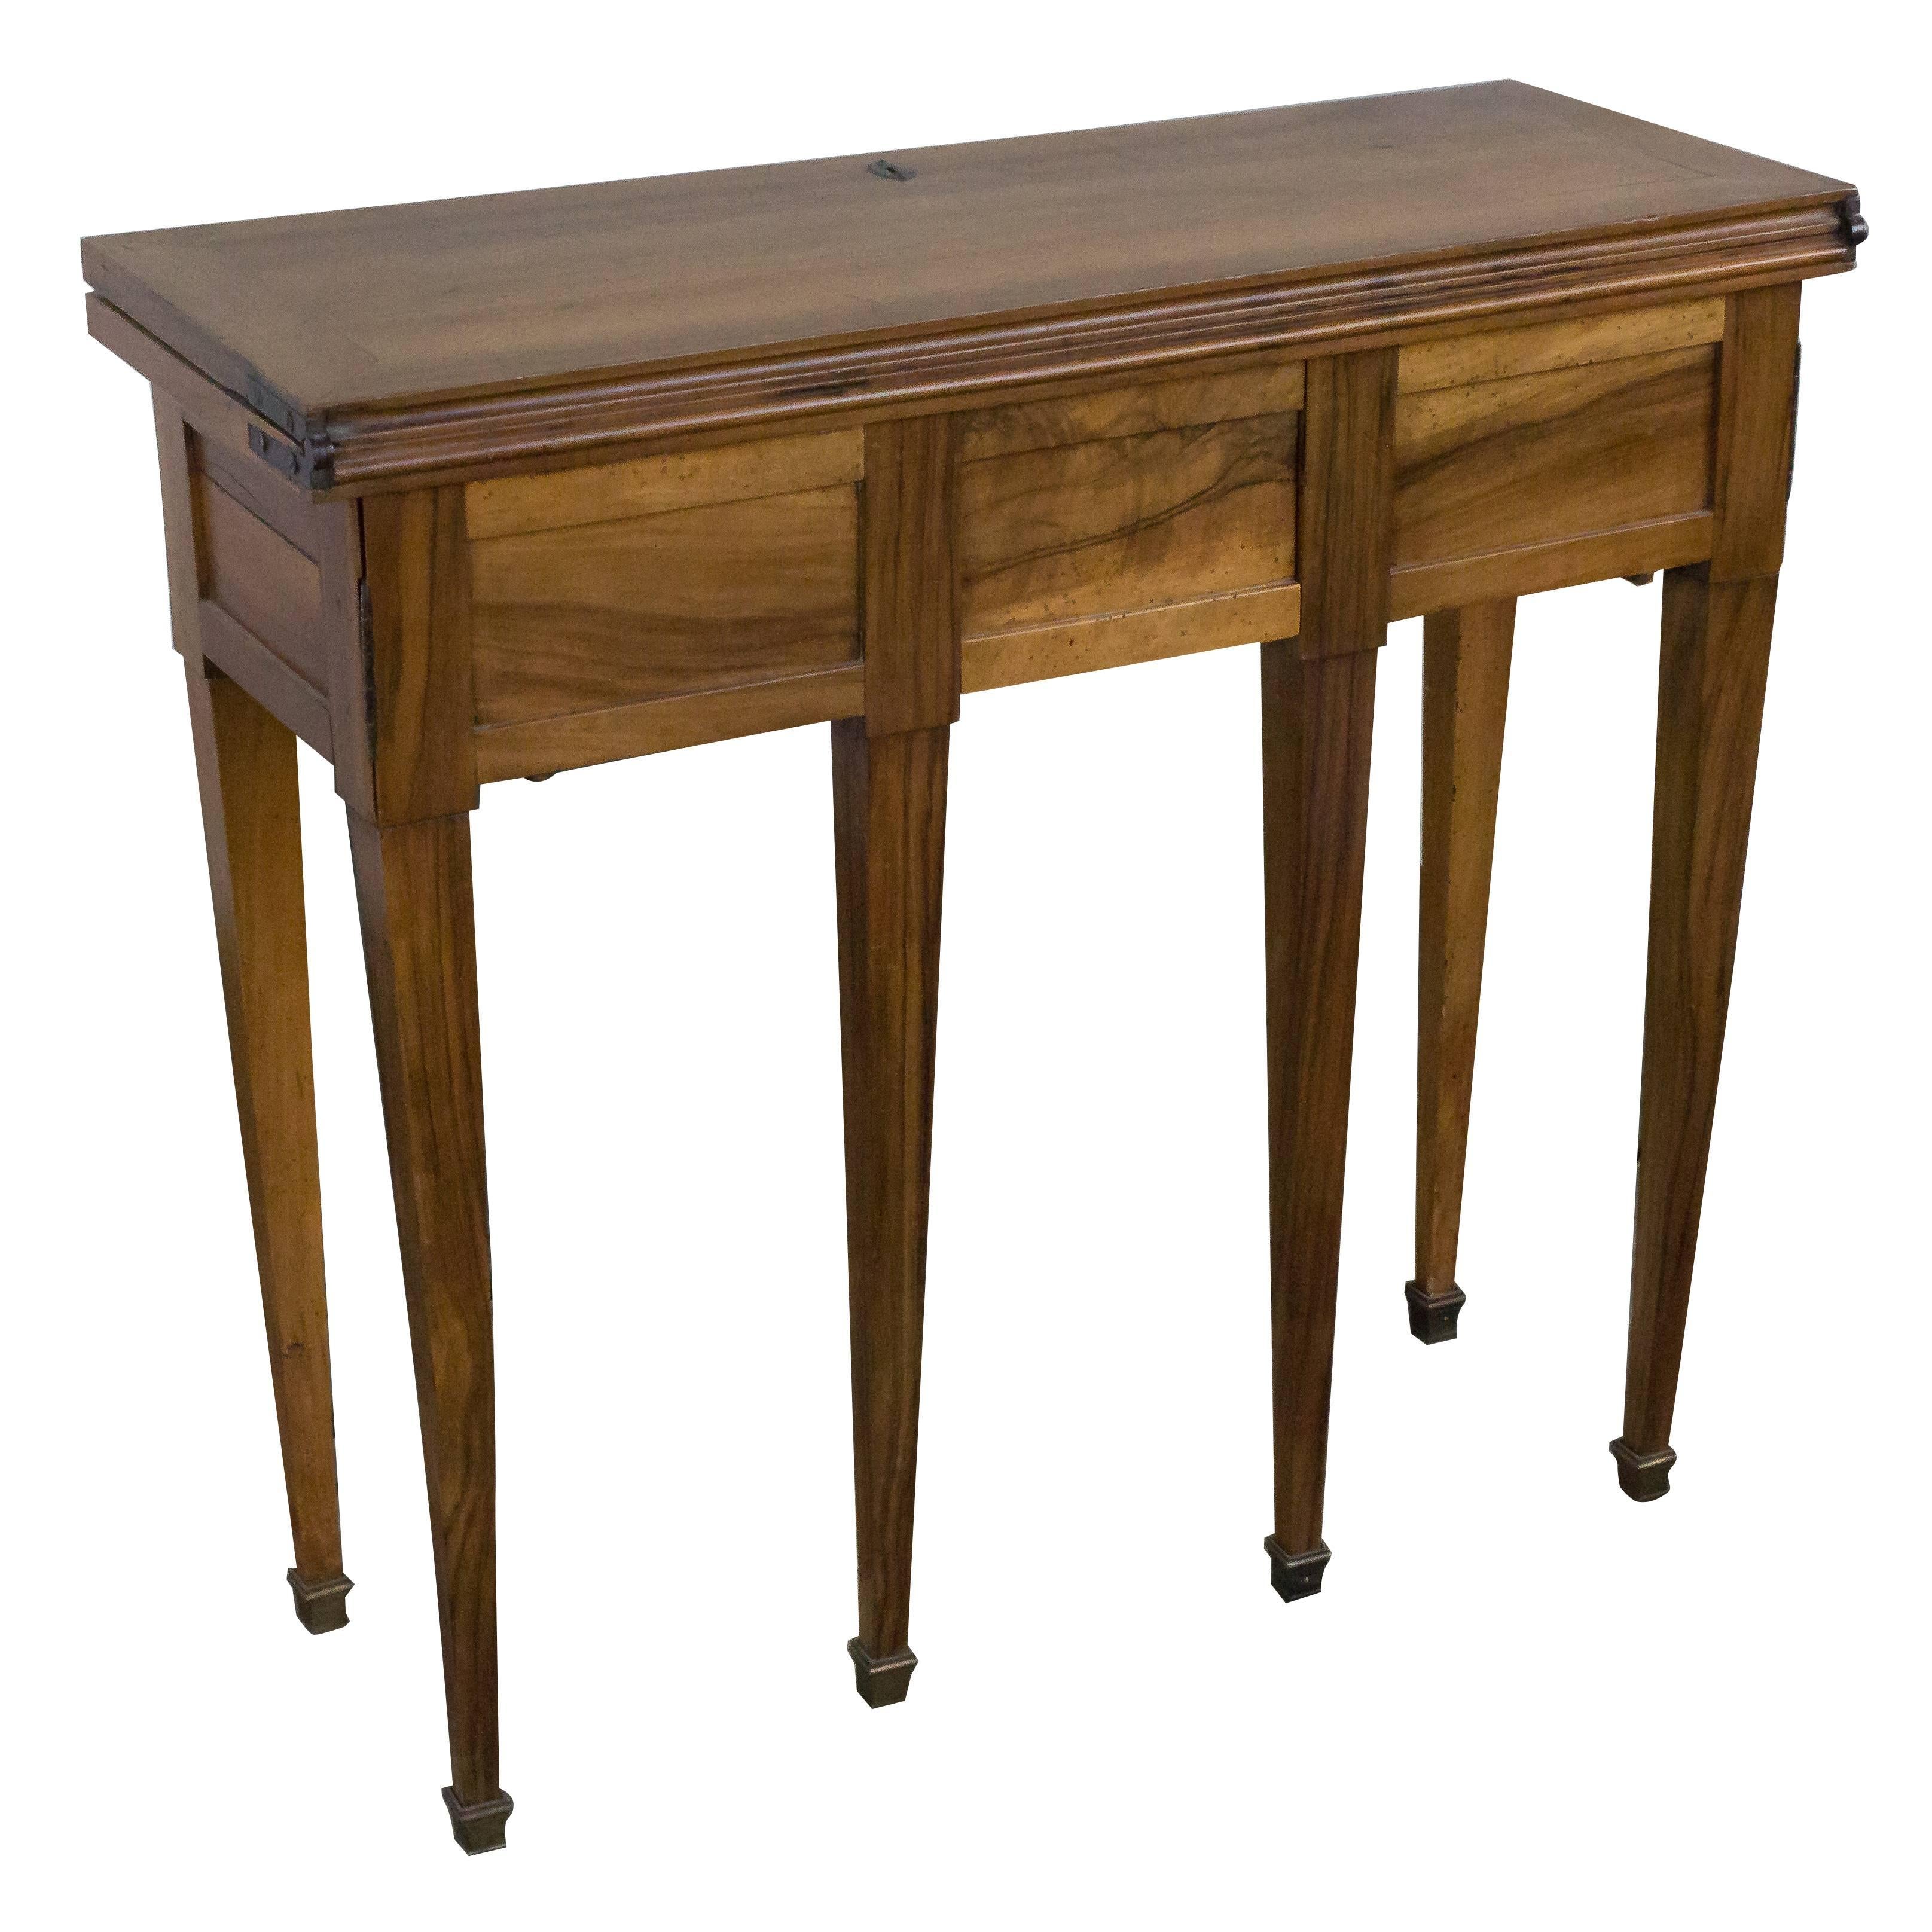 French Writing Desk with Drawers and Fold-Out Top